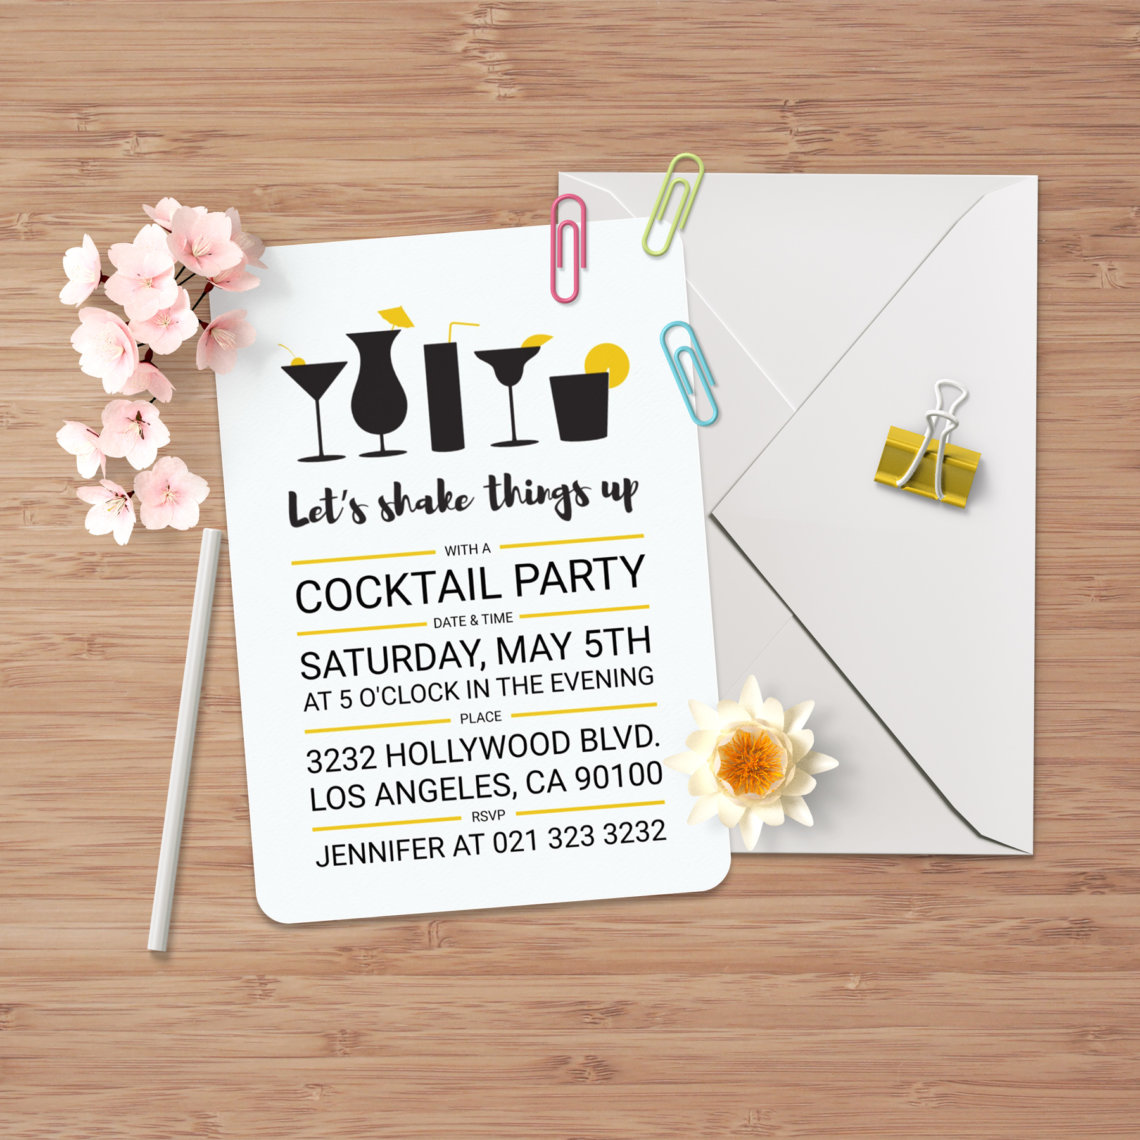 cocktail party invitation by j32design mockup01